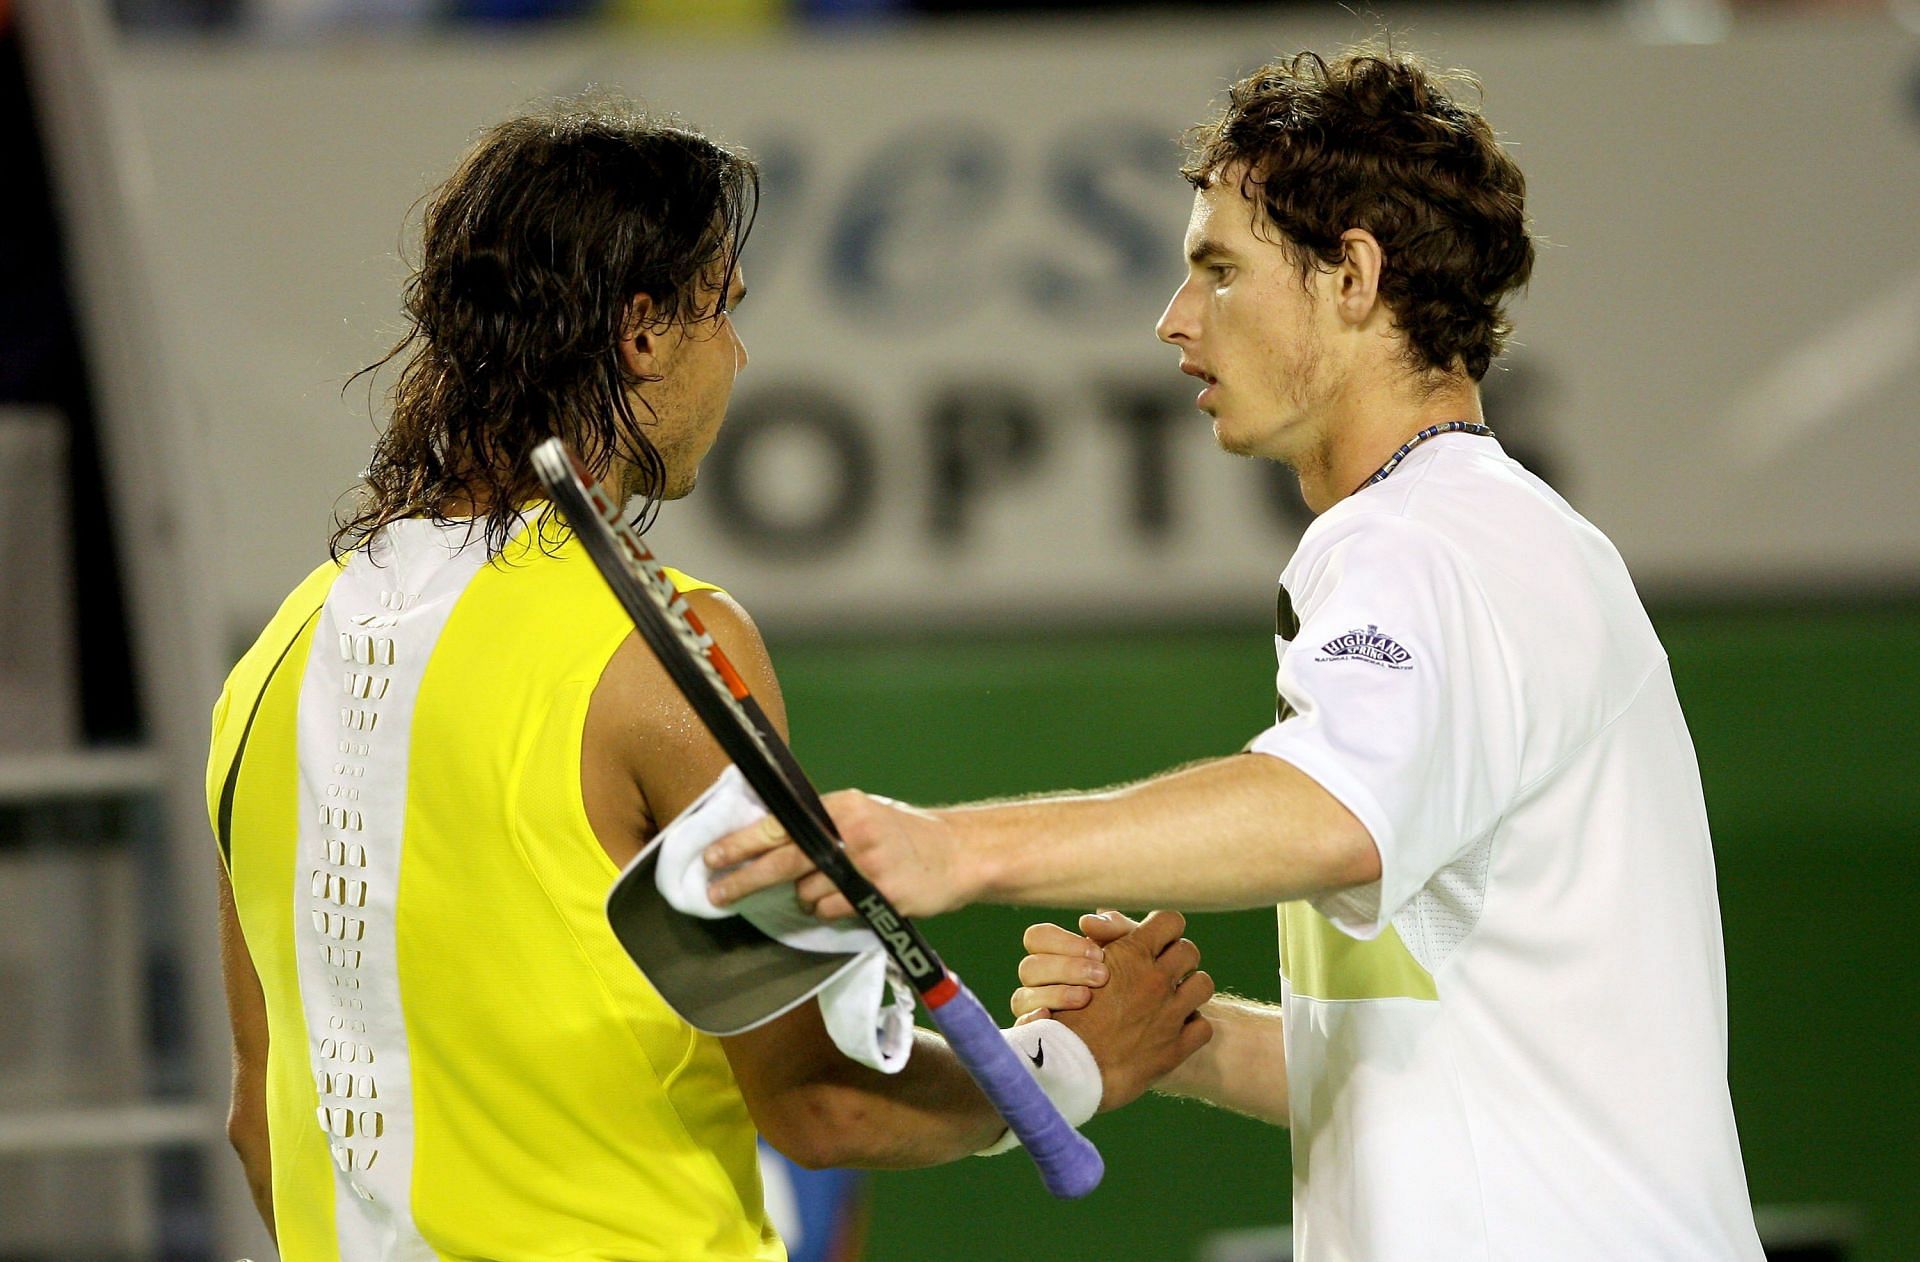 The duo embrace each other during the 2007 Australian Open